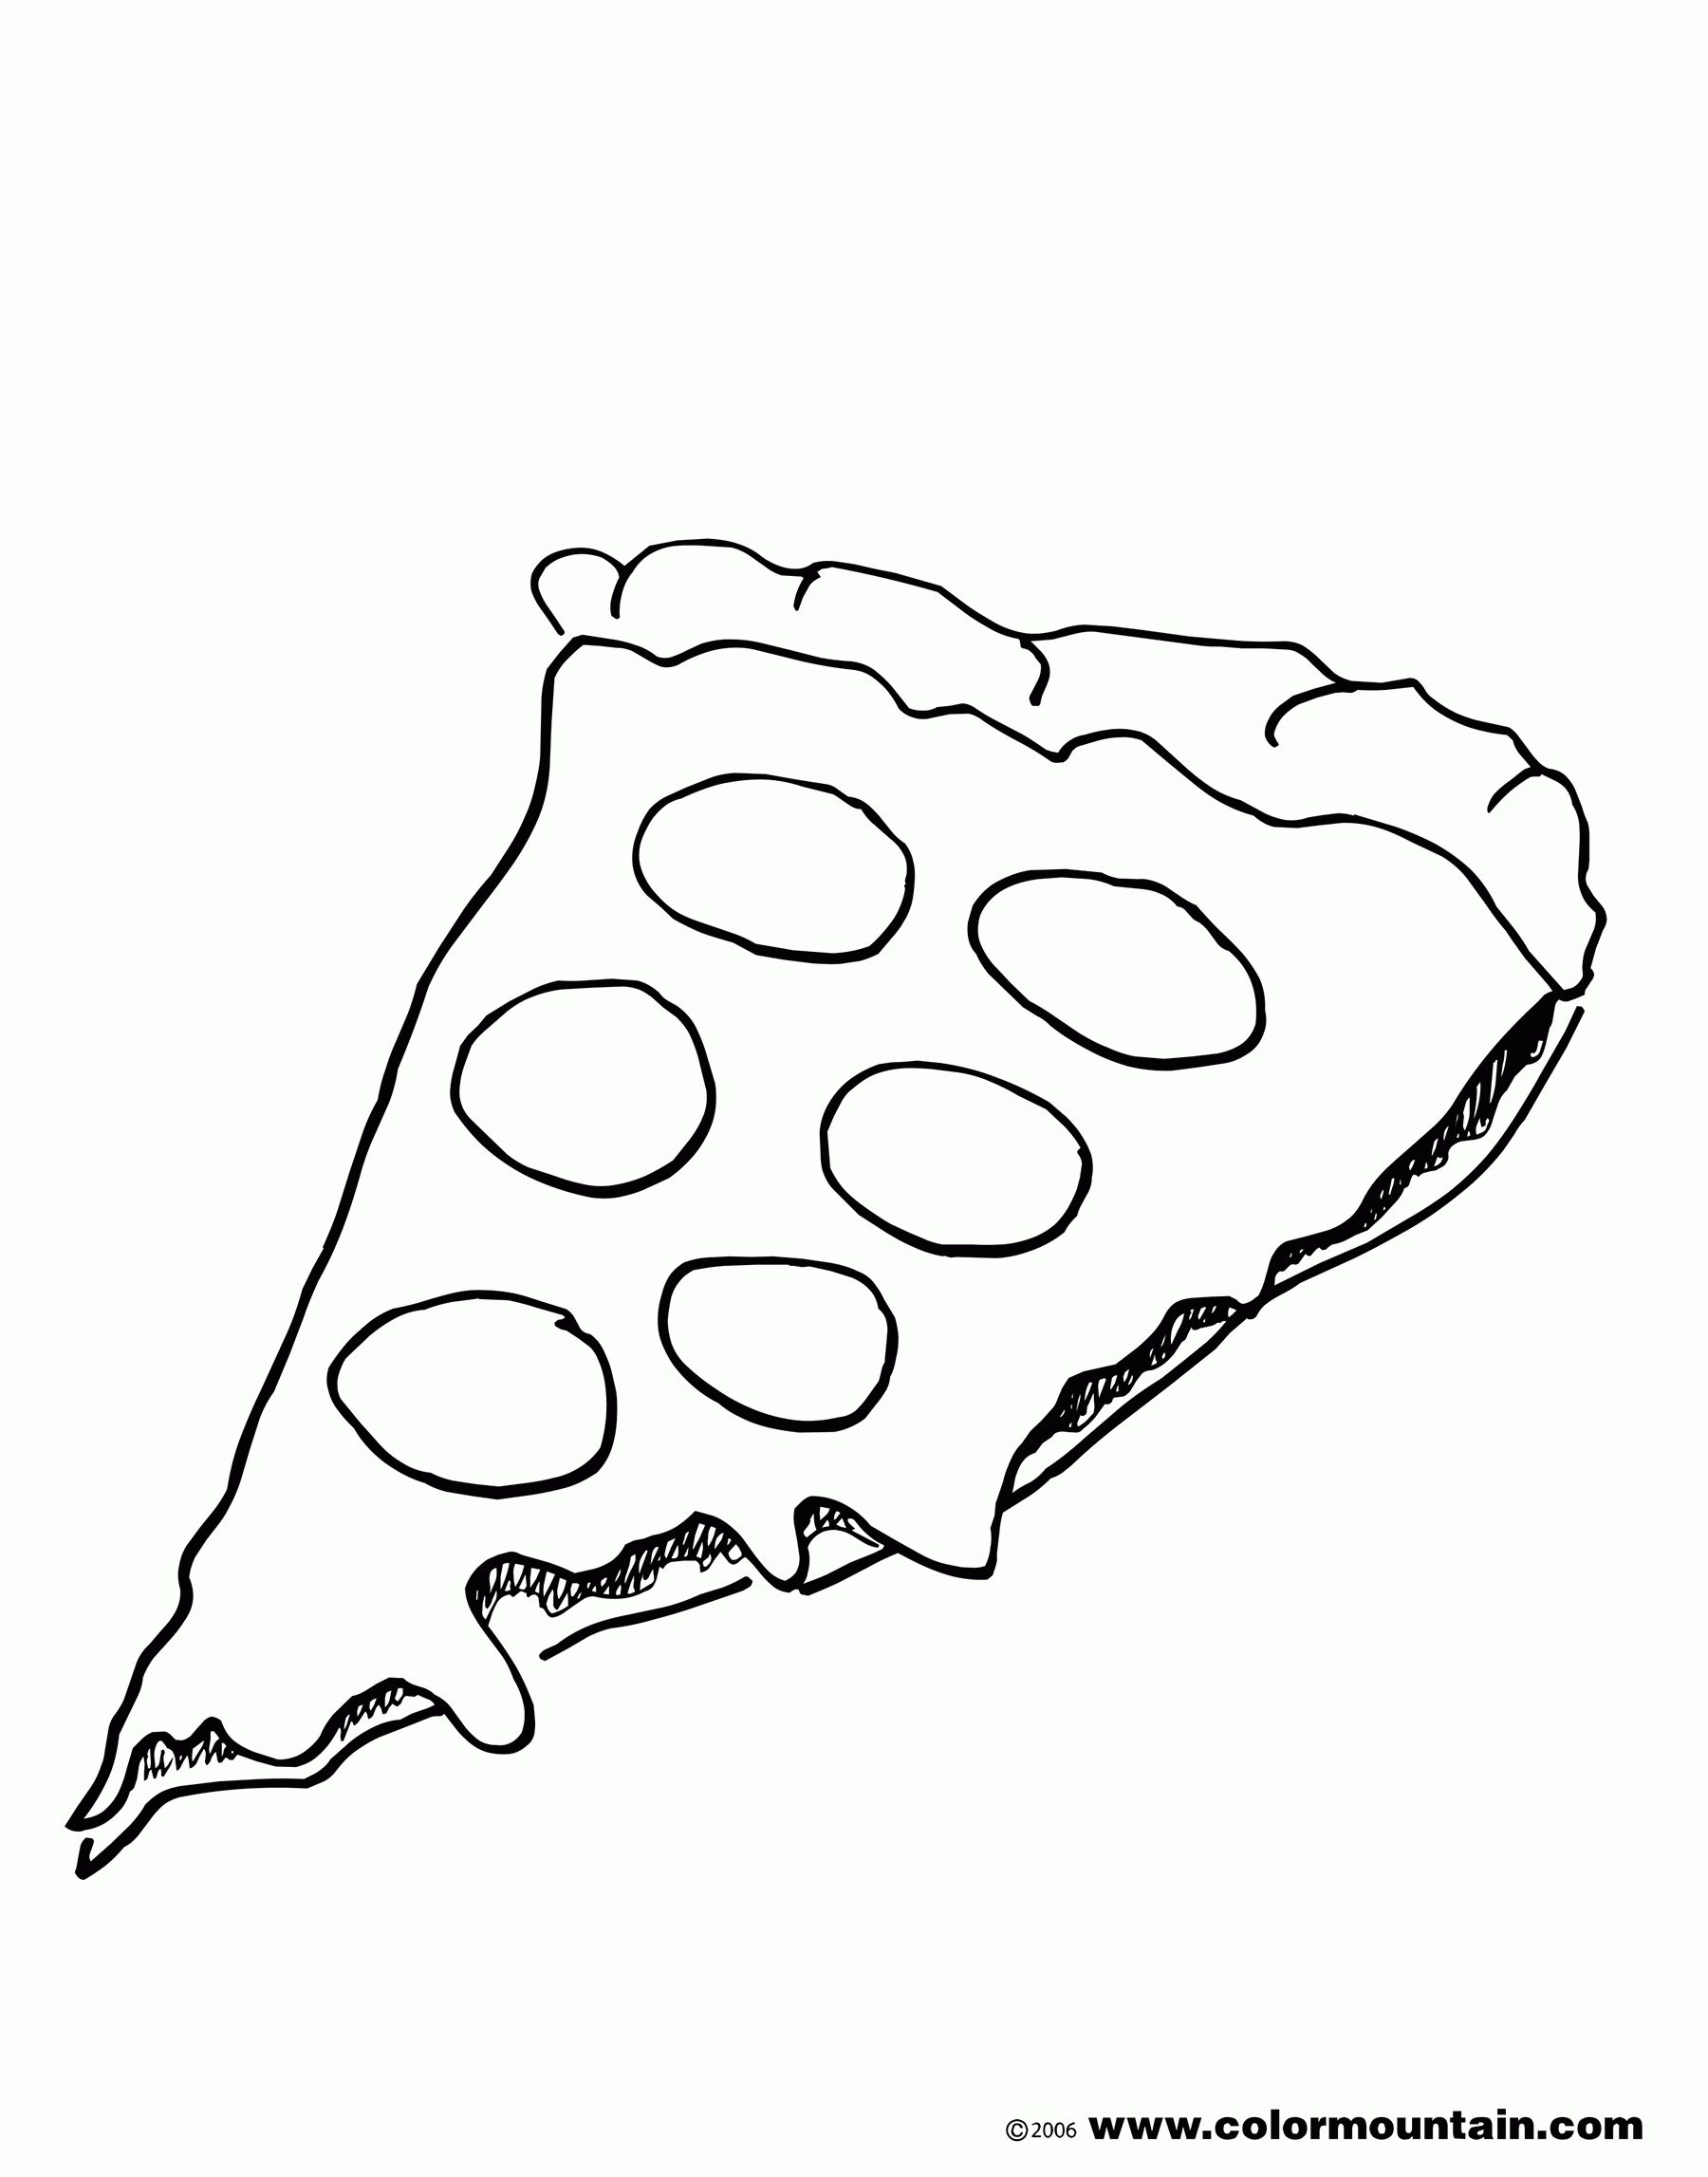 Cartoon Pizza Coloring Page - Coloring Pages For All Ages